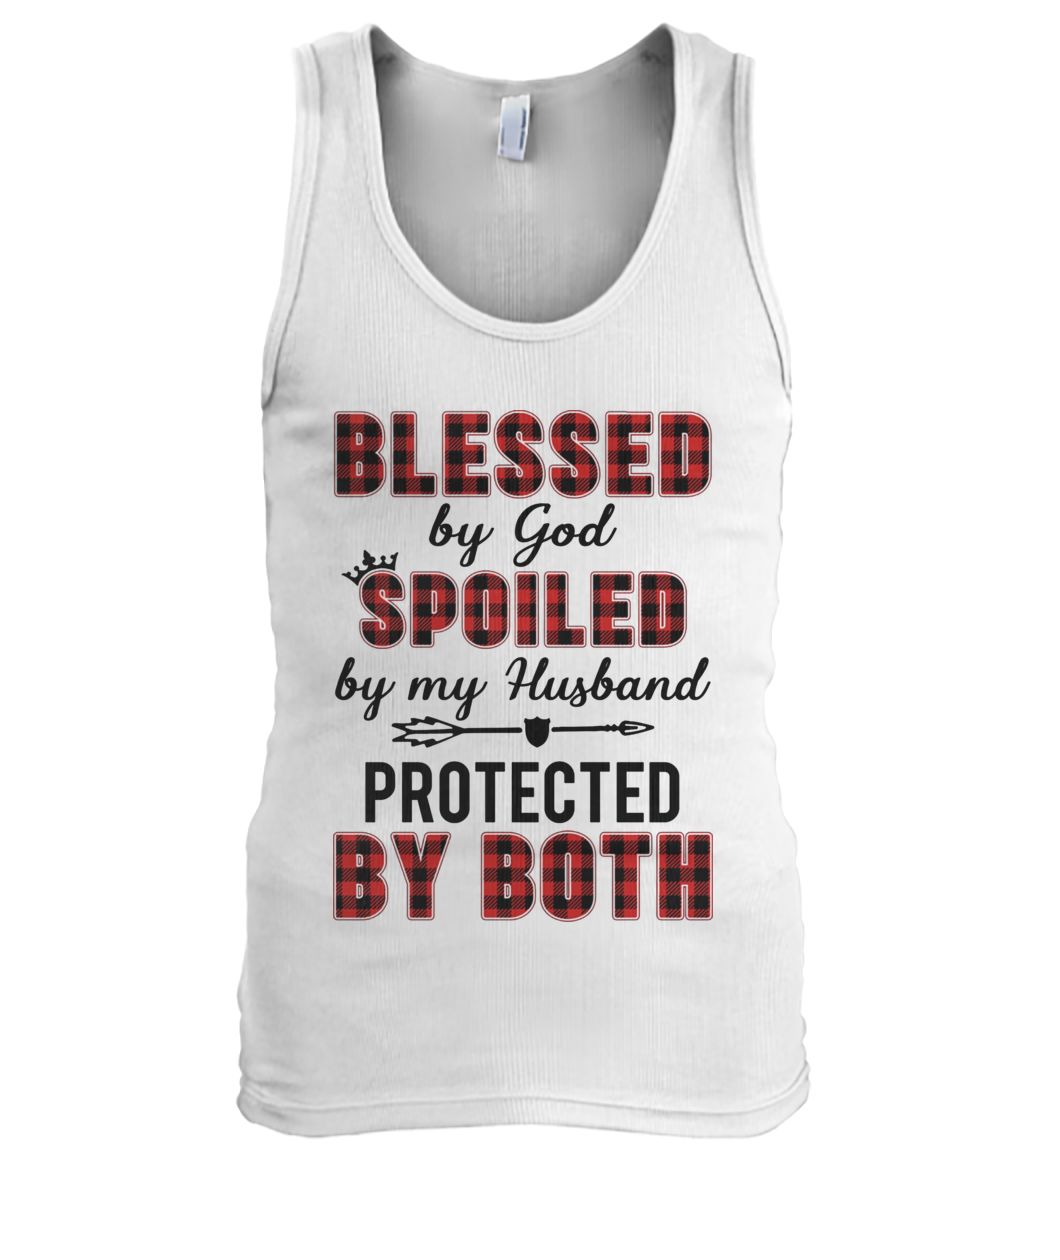 Blessed by god spoiled by my husband protected by both men's tank top